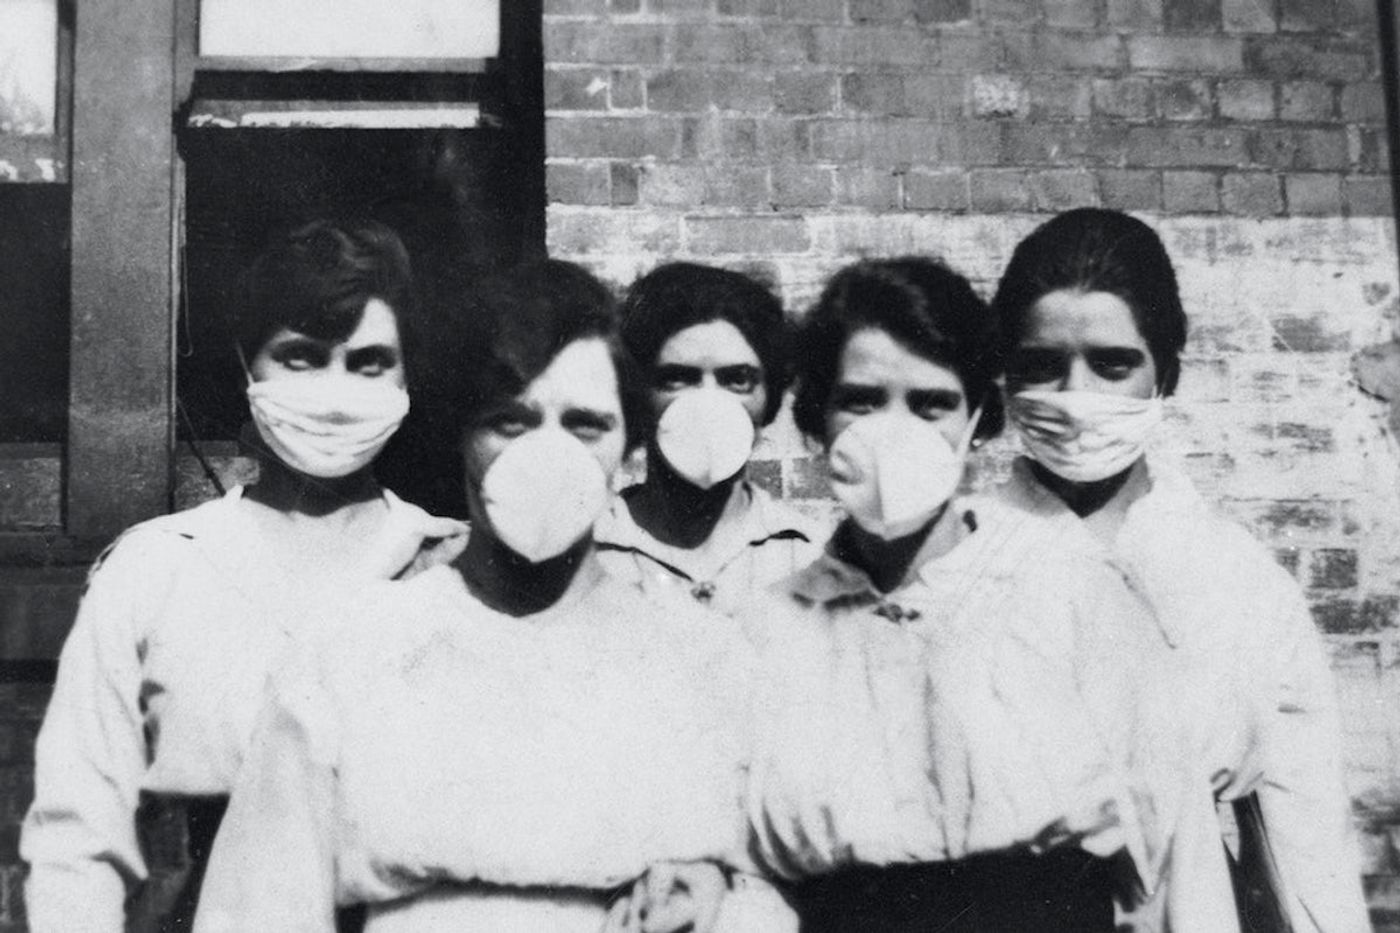 Women wearing surgical masks during the influenza epidemic, Brisbane (1919). Original image from State Library of Queensland. / Credit: Rawpixel/Free public domain CC0 image 